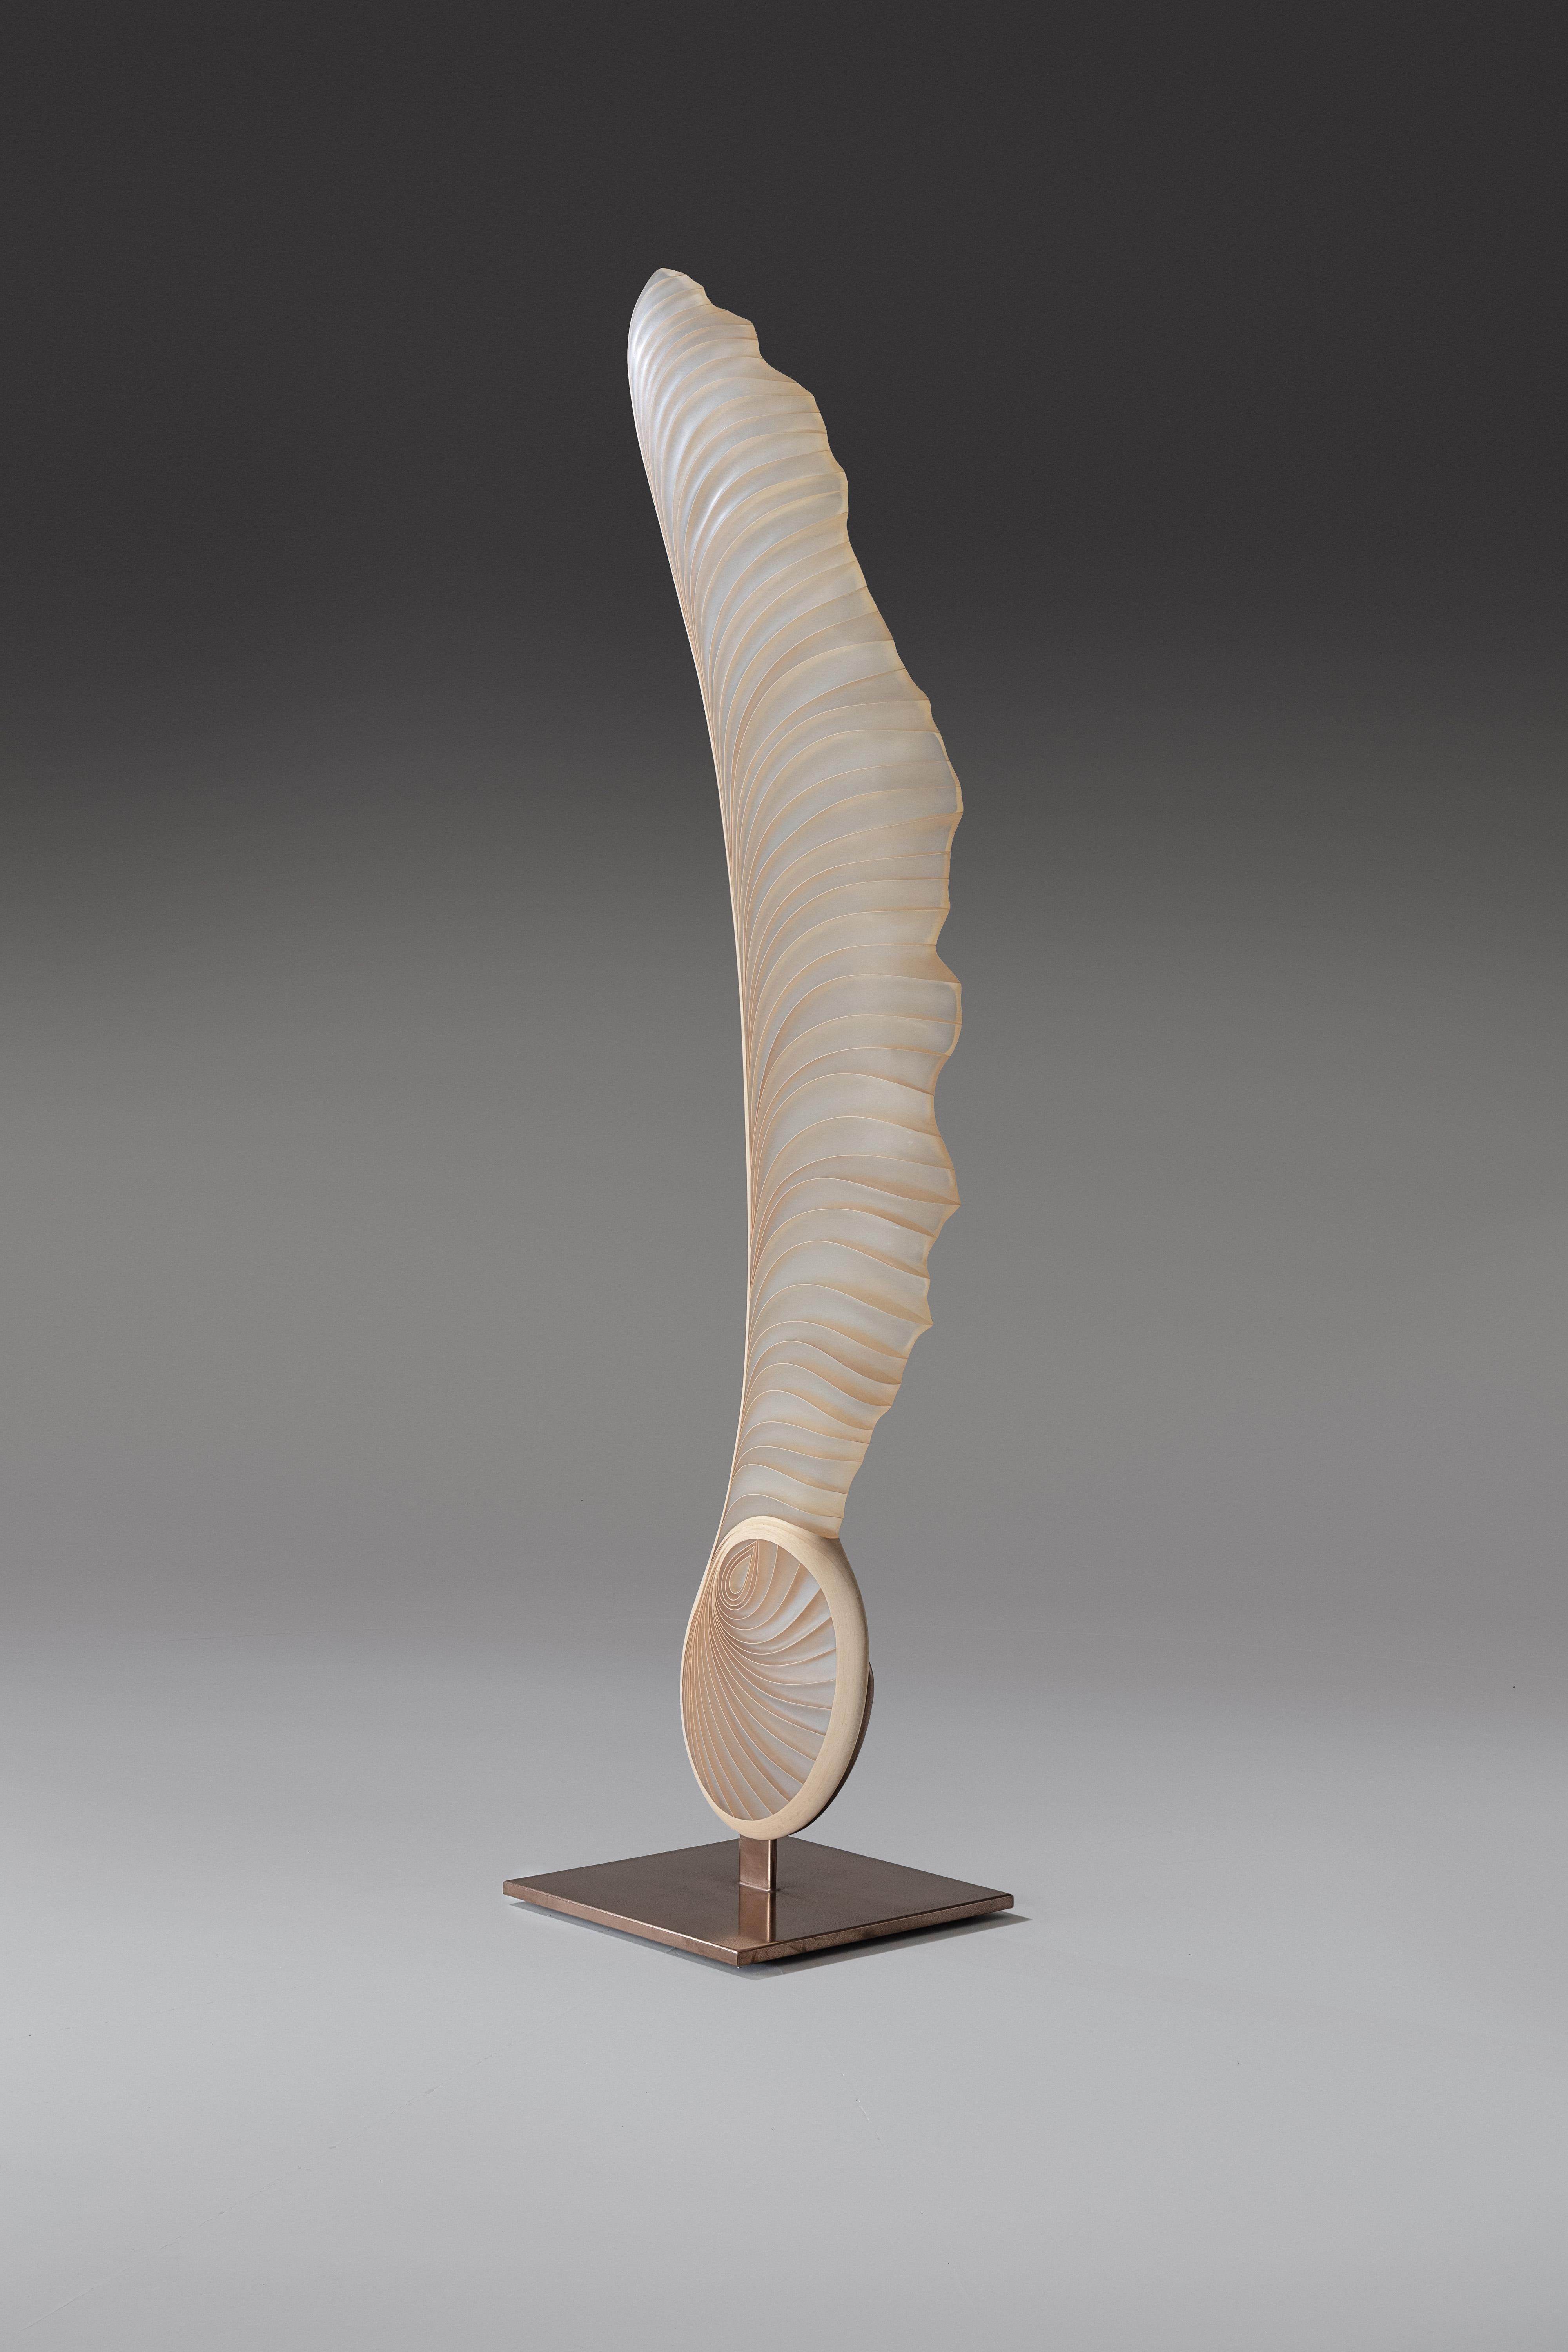 Woodwork Marc Fish Ethereal Sculptural Sycamore Seed UK 2022 For Sale